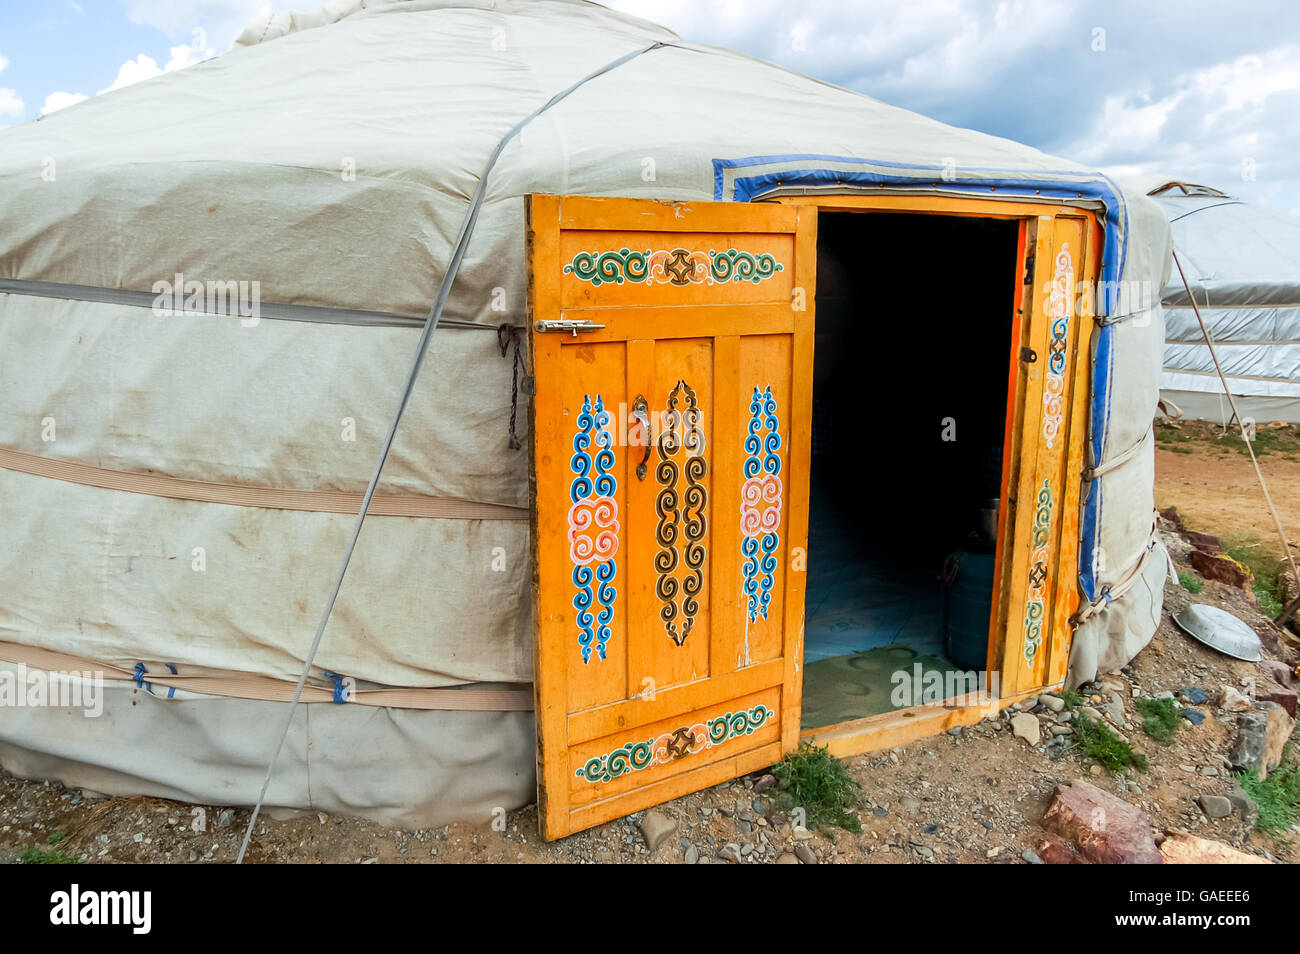 Mongolian yurt exterior, called a ger, on central Mongolian steppe Stock Photo